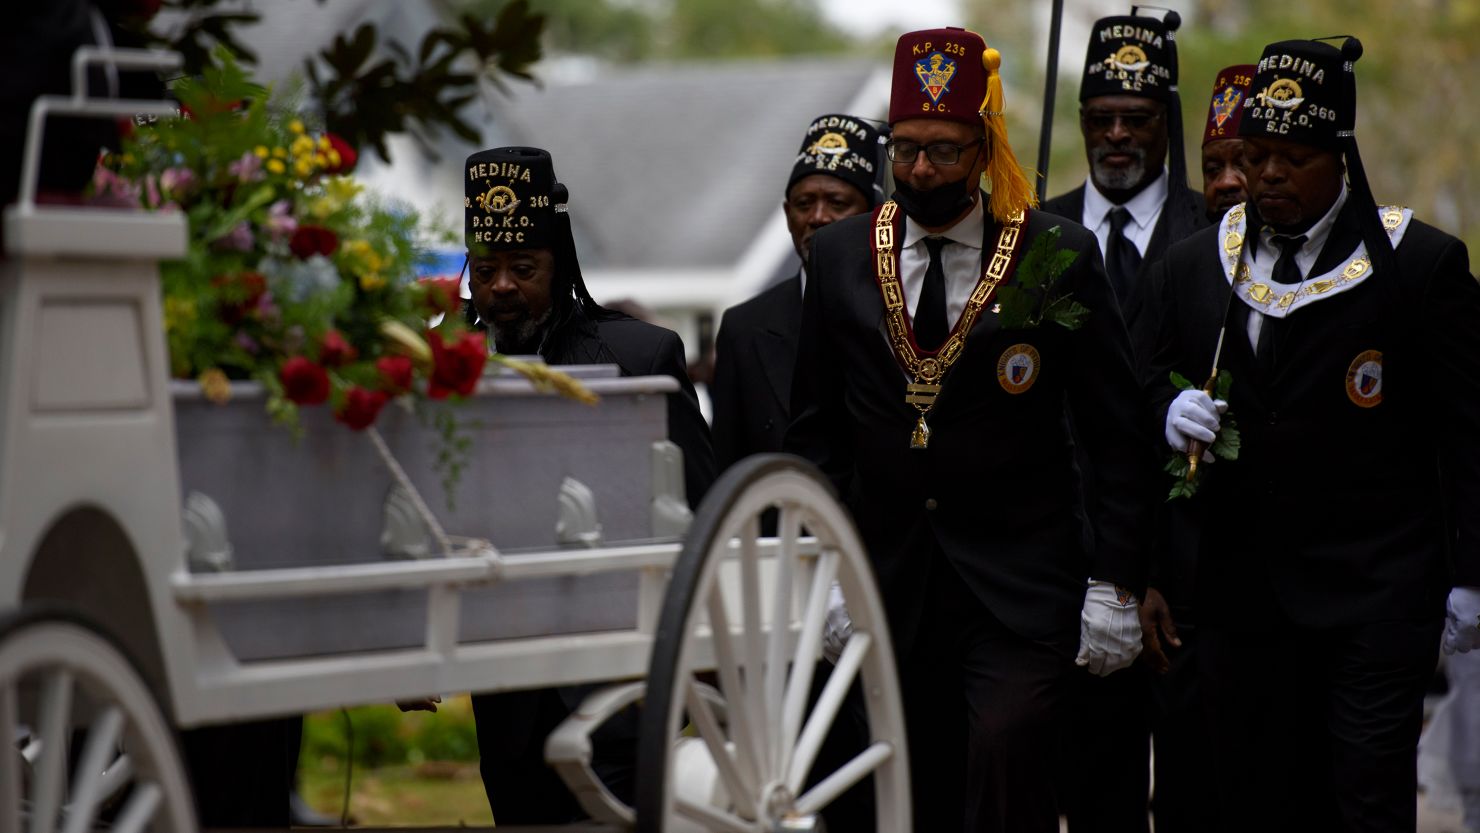 Members of a Masonic lodge and Knights of Columbus carry soil collected in honor of Joshua Halsey to his burial site.